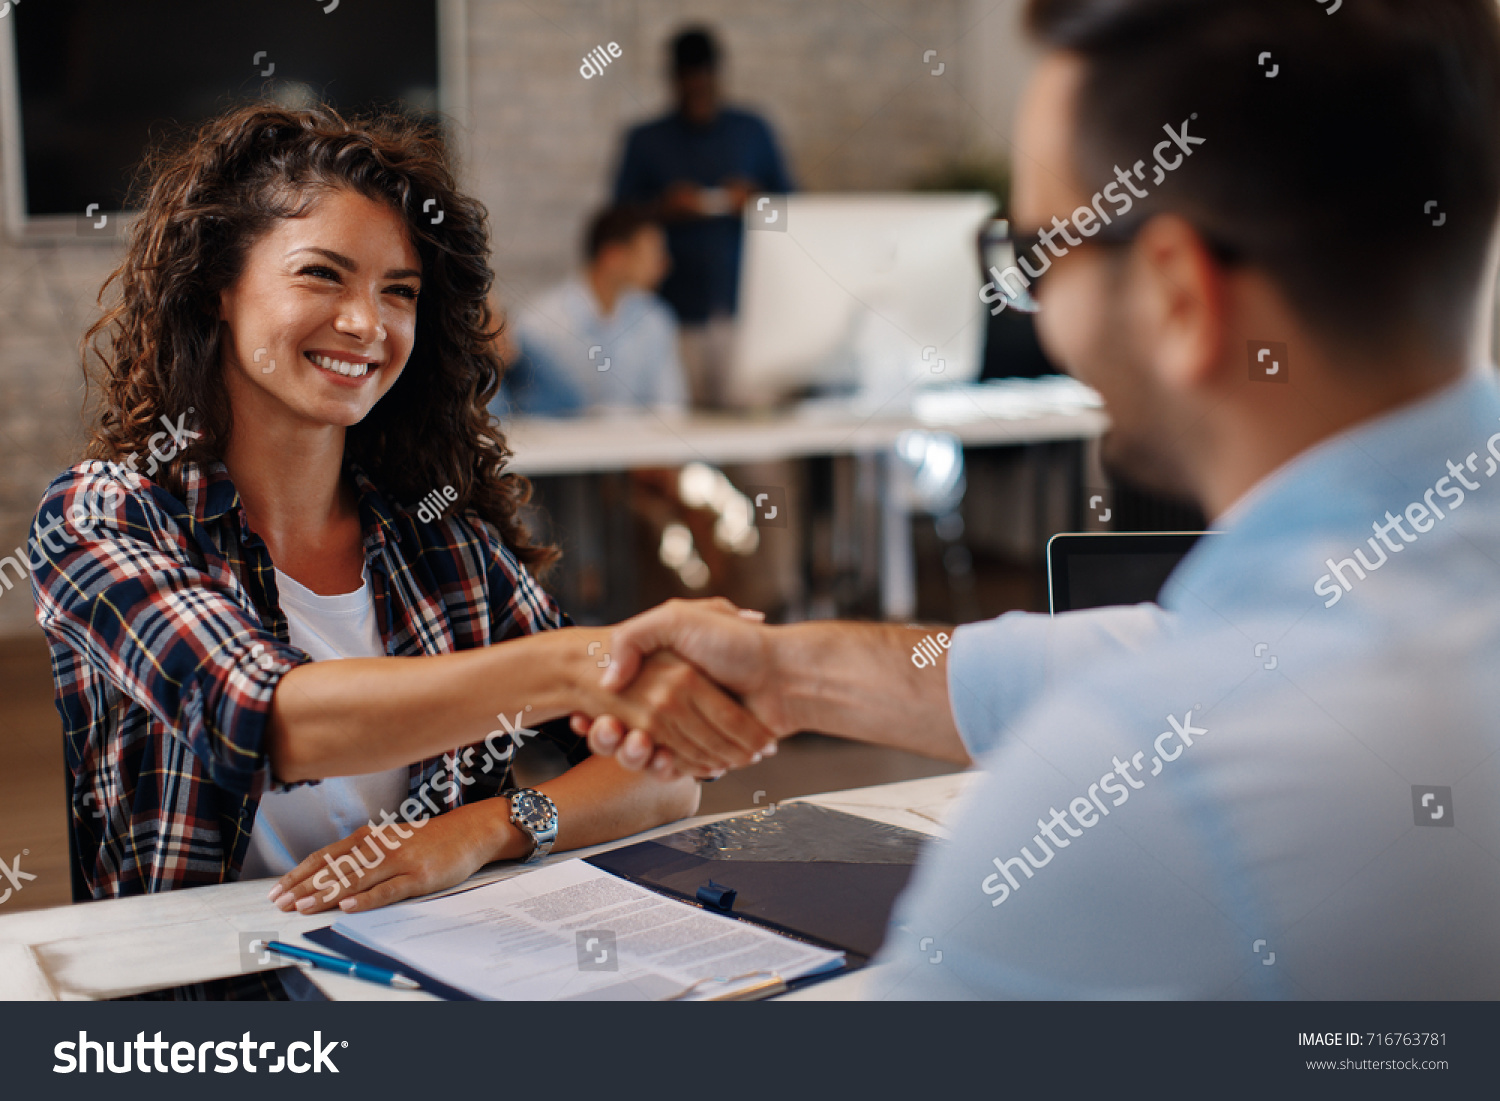 Young woman signing contracts and handshake with a manager #716763781